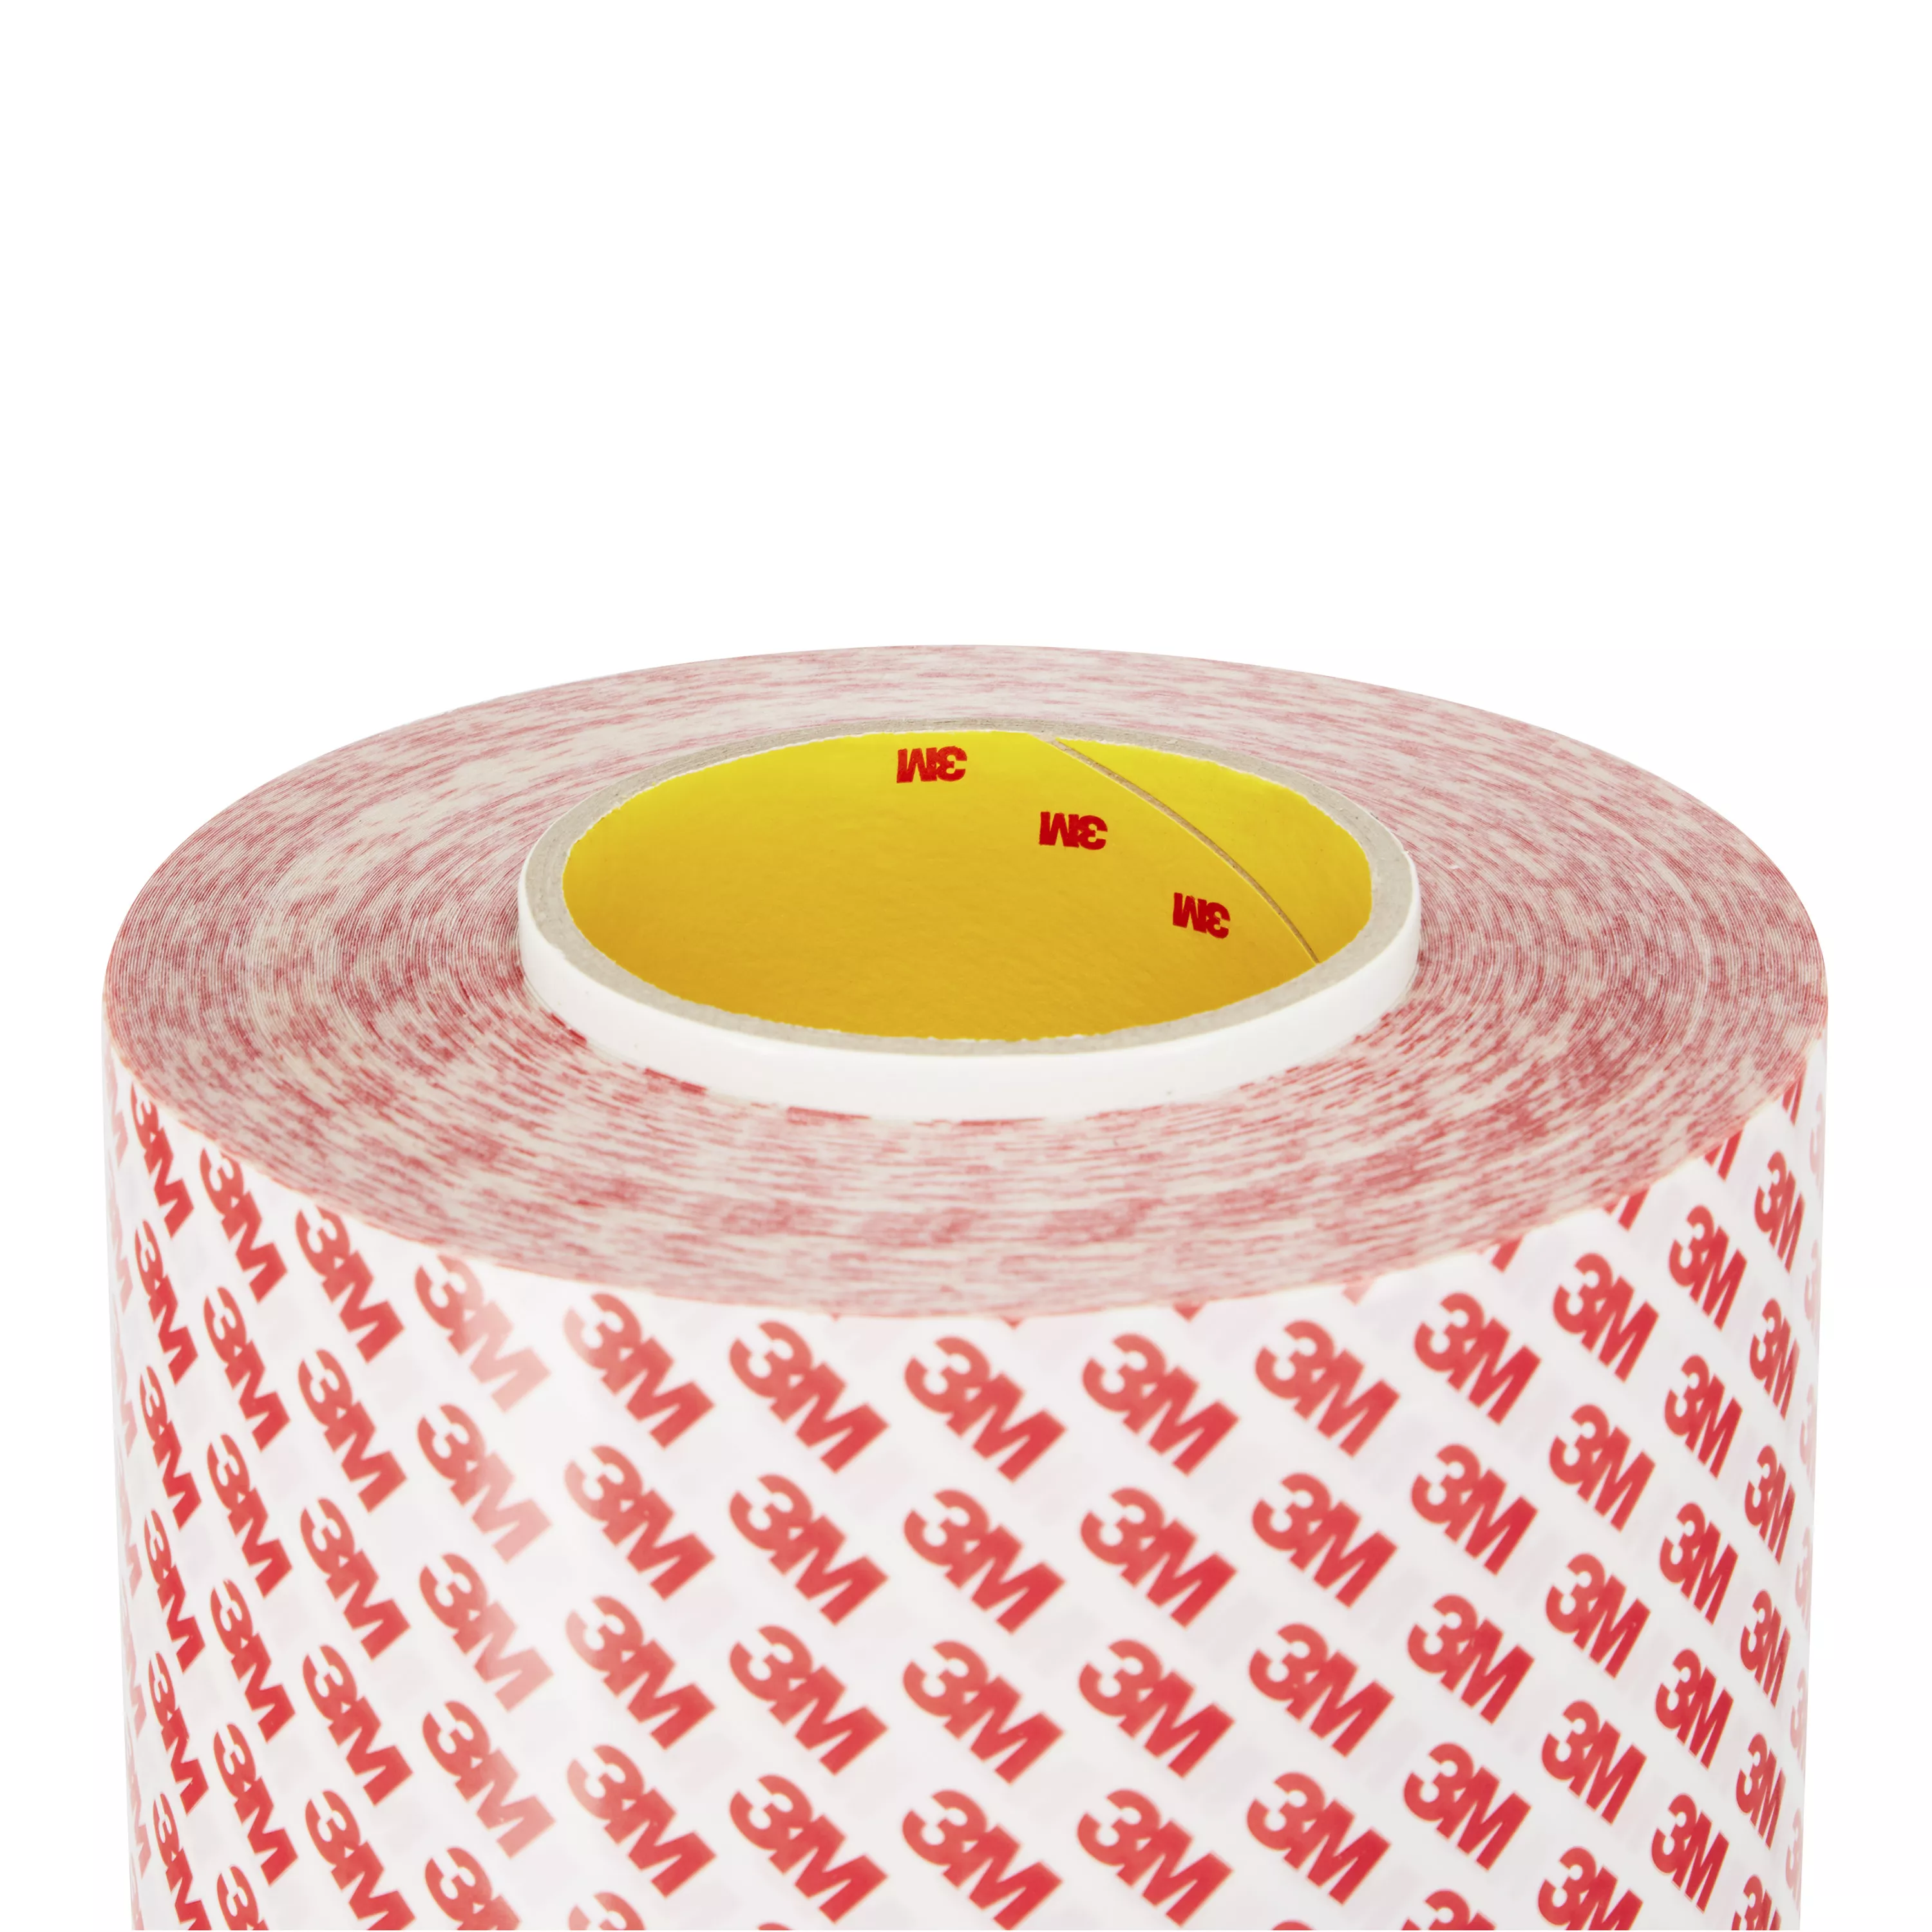 Product Number GPT-020 | 3M™ Double Coated Tape Paper Liner GPT-020